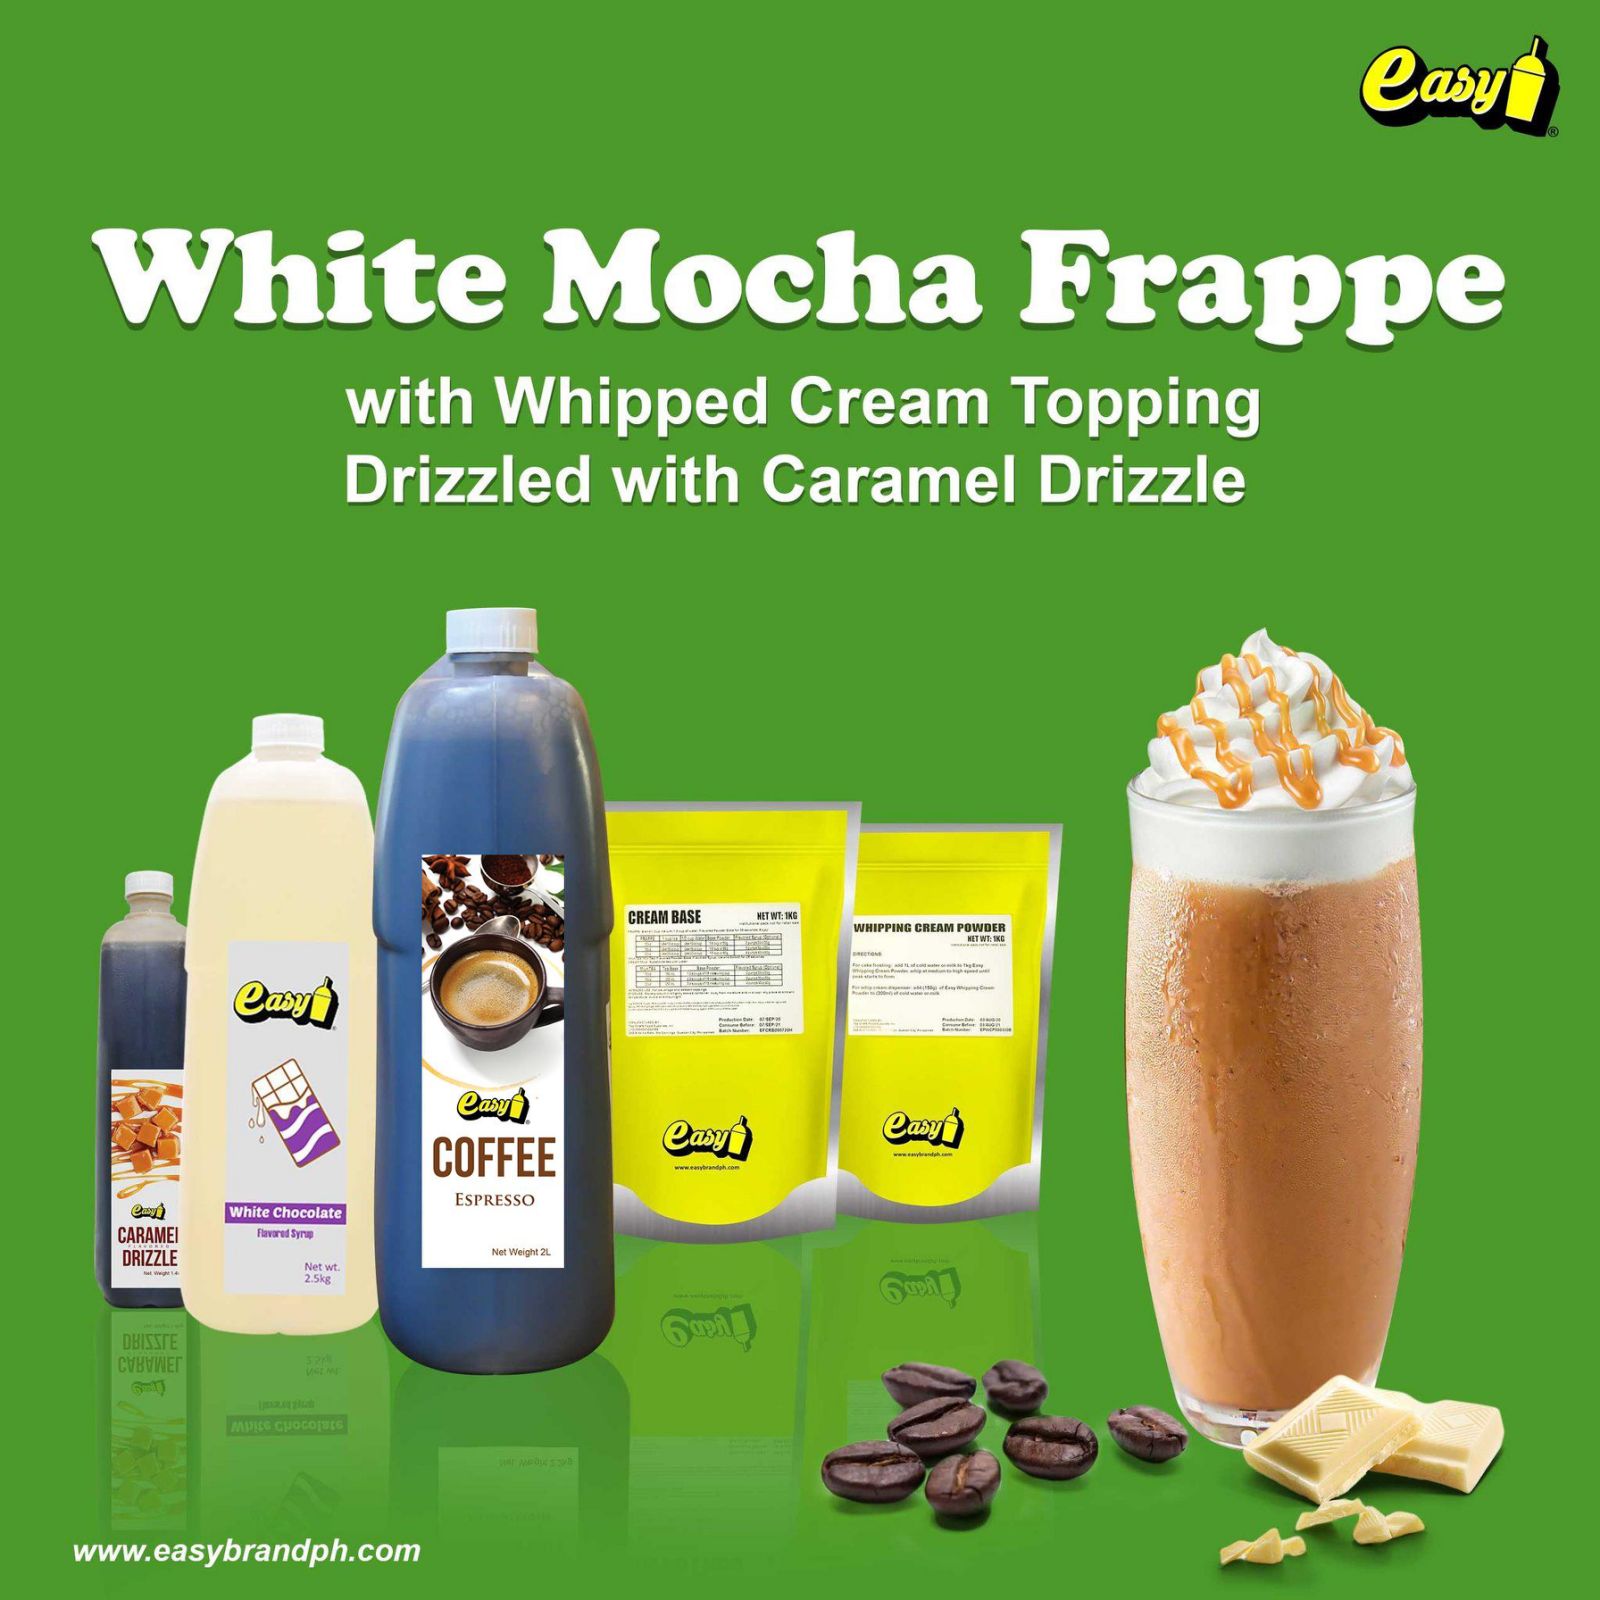 White Mocha Frappe with Whipped Cream drizzled with Caramel